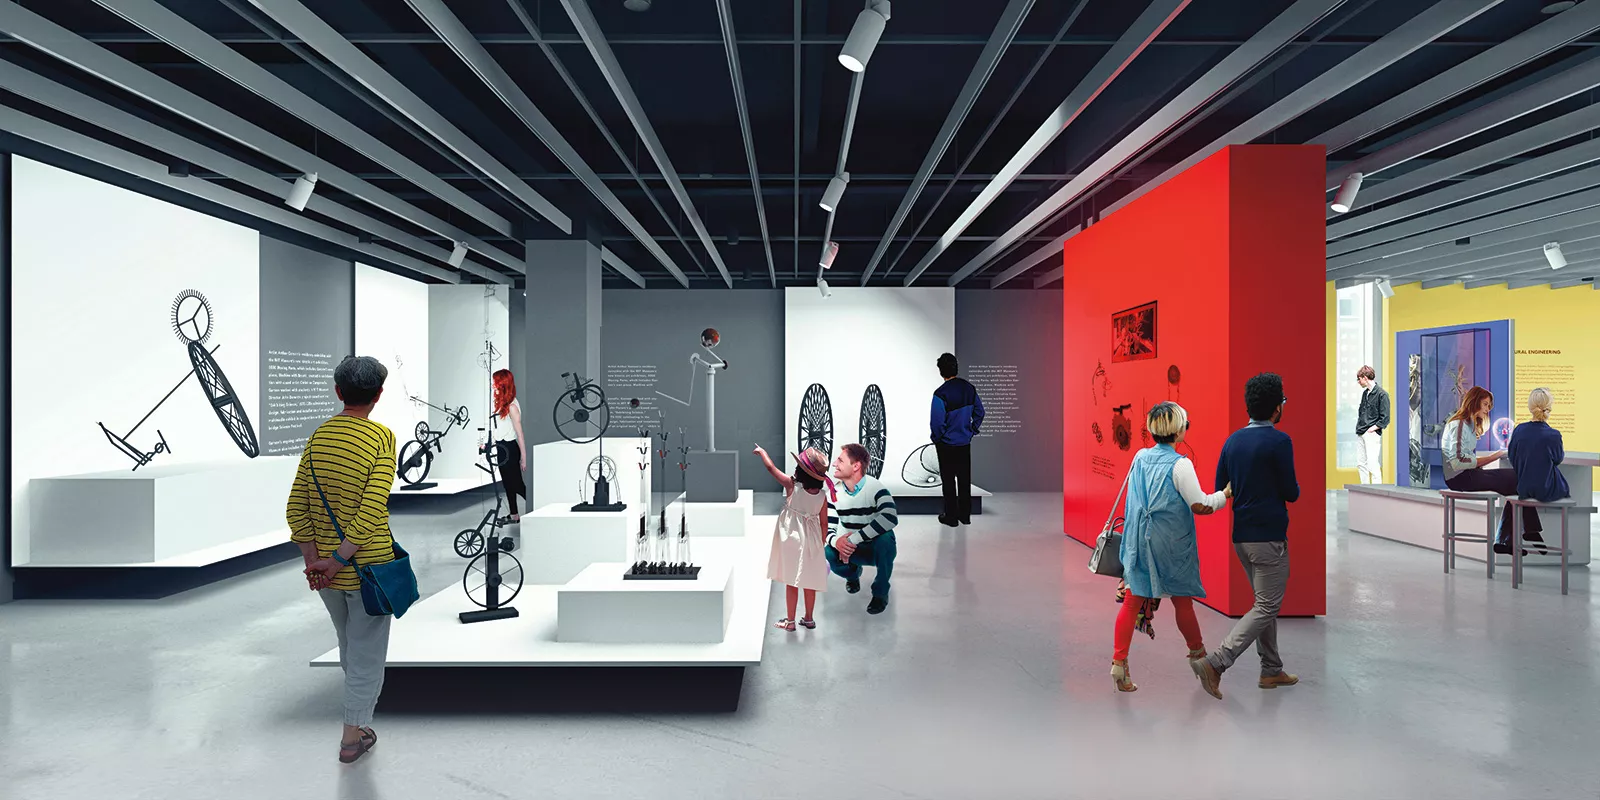 MIT Museum in USA, North America | Museums - Rated 3.5